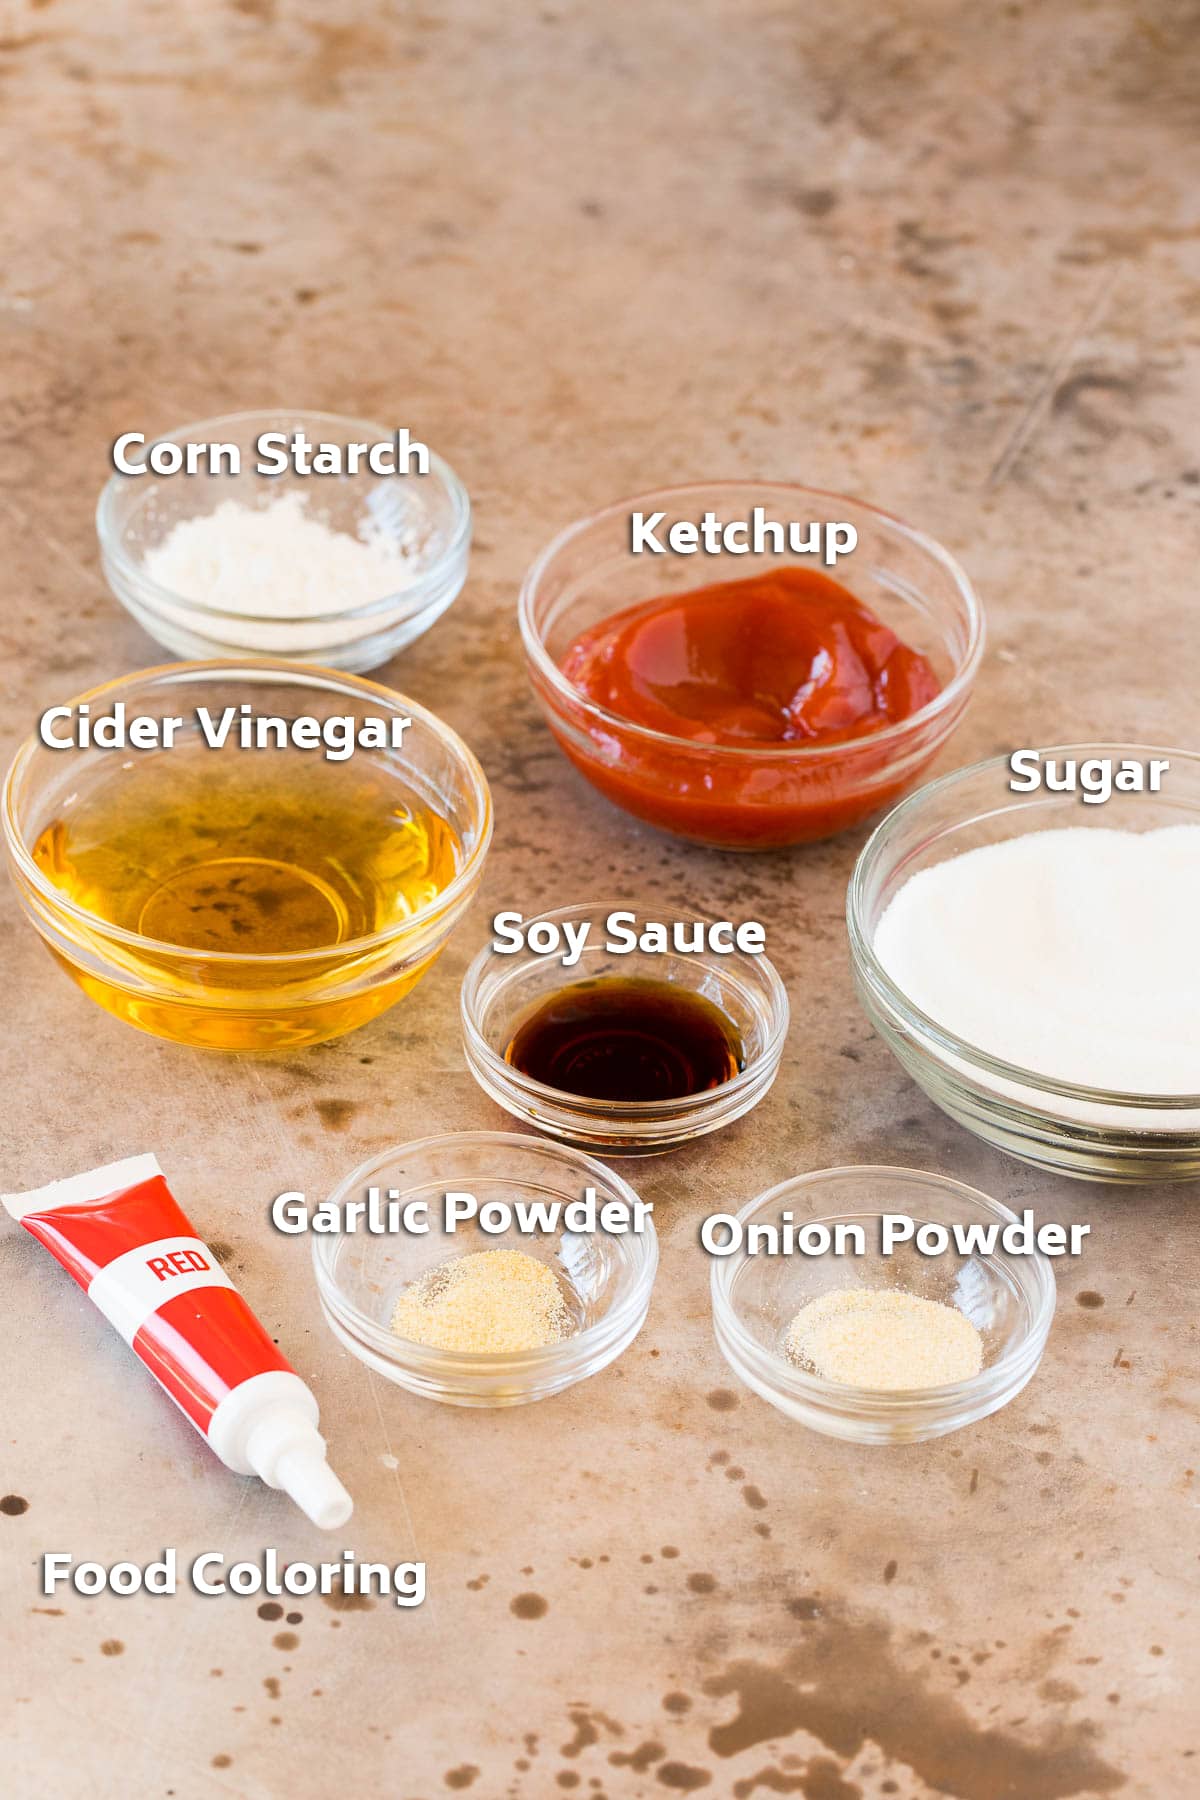 Ingredients in bowls including sugar, vinegar, soy sauce and spices.